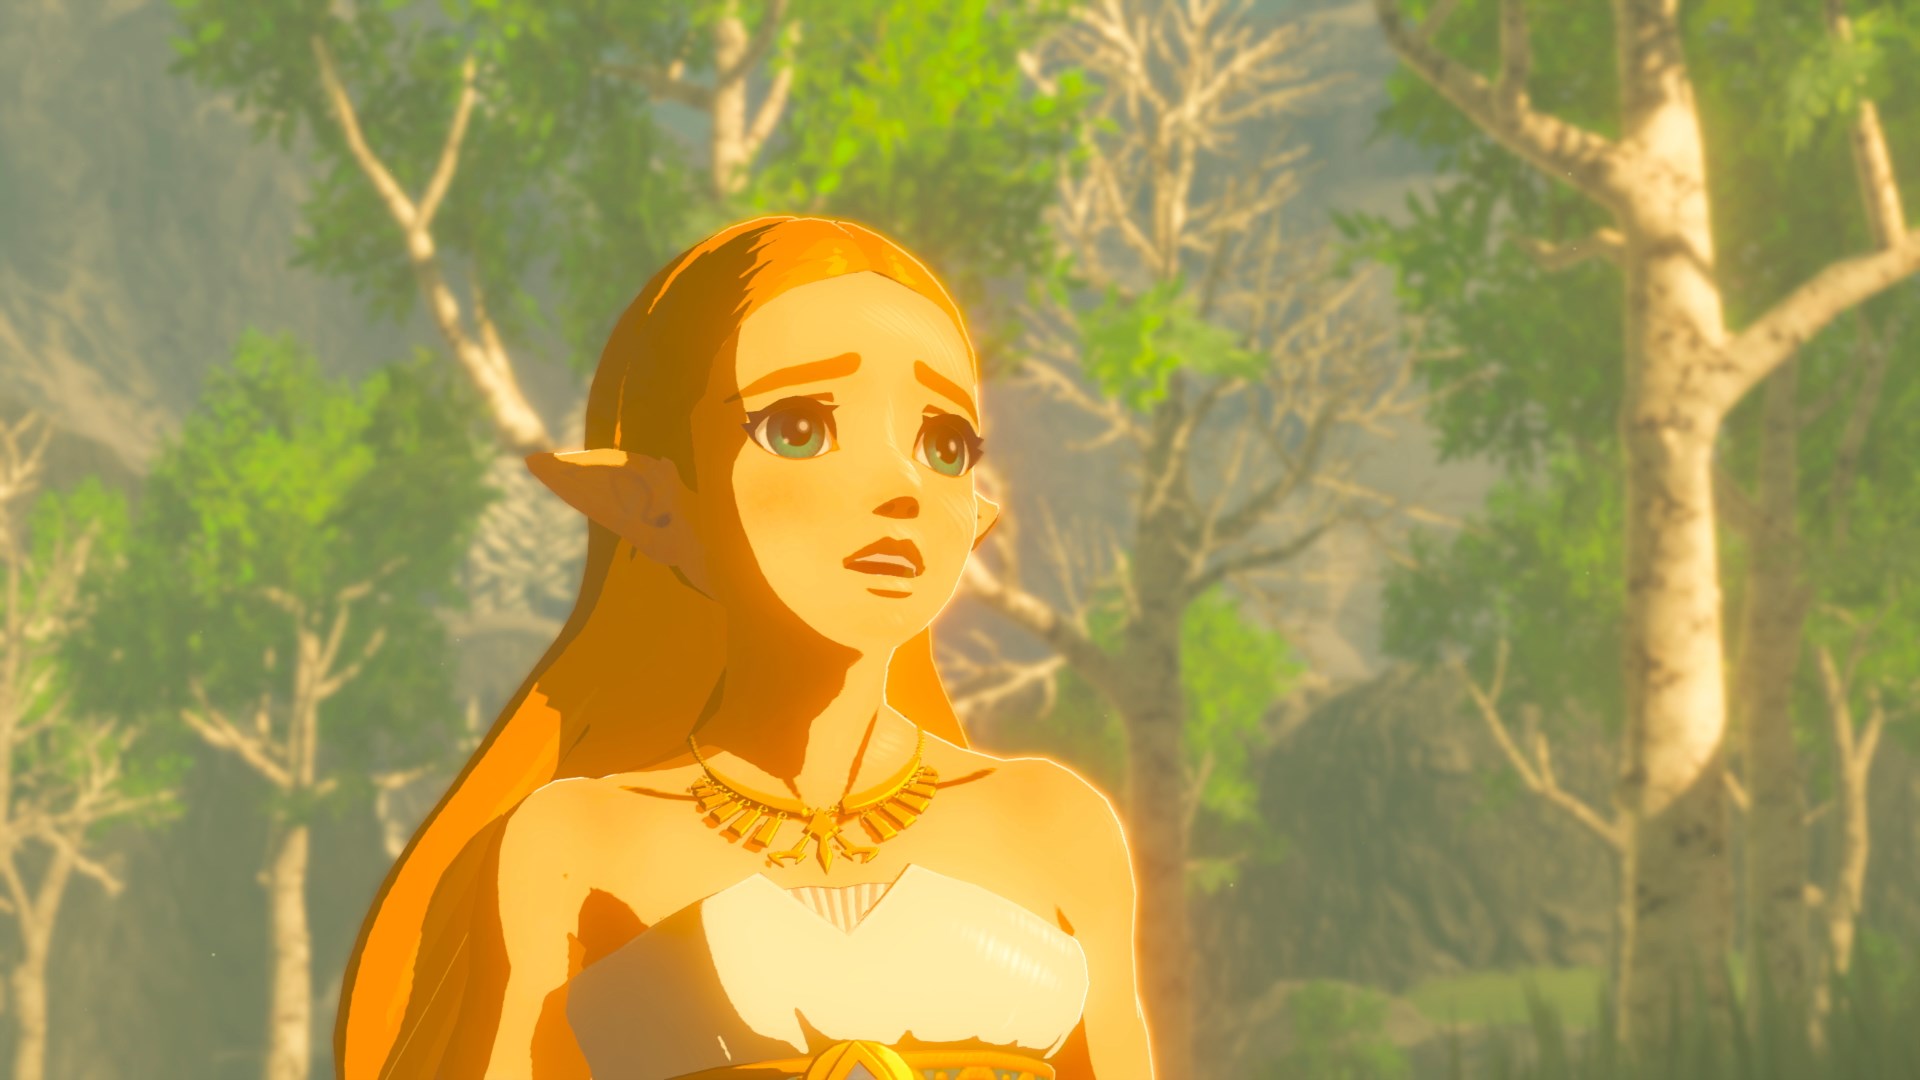 Images of The Legend Of Zelda: Breath Of The Wild | 1920x1080